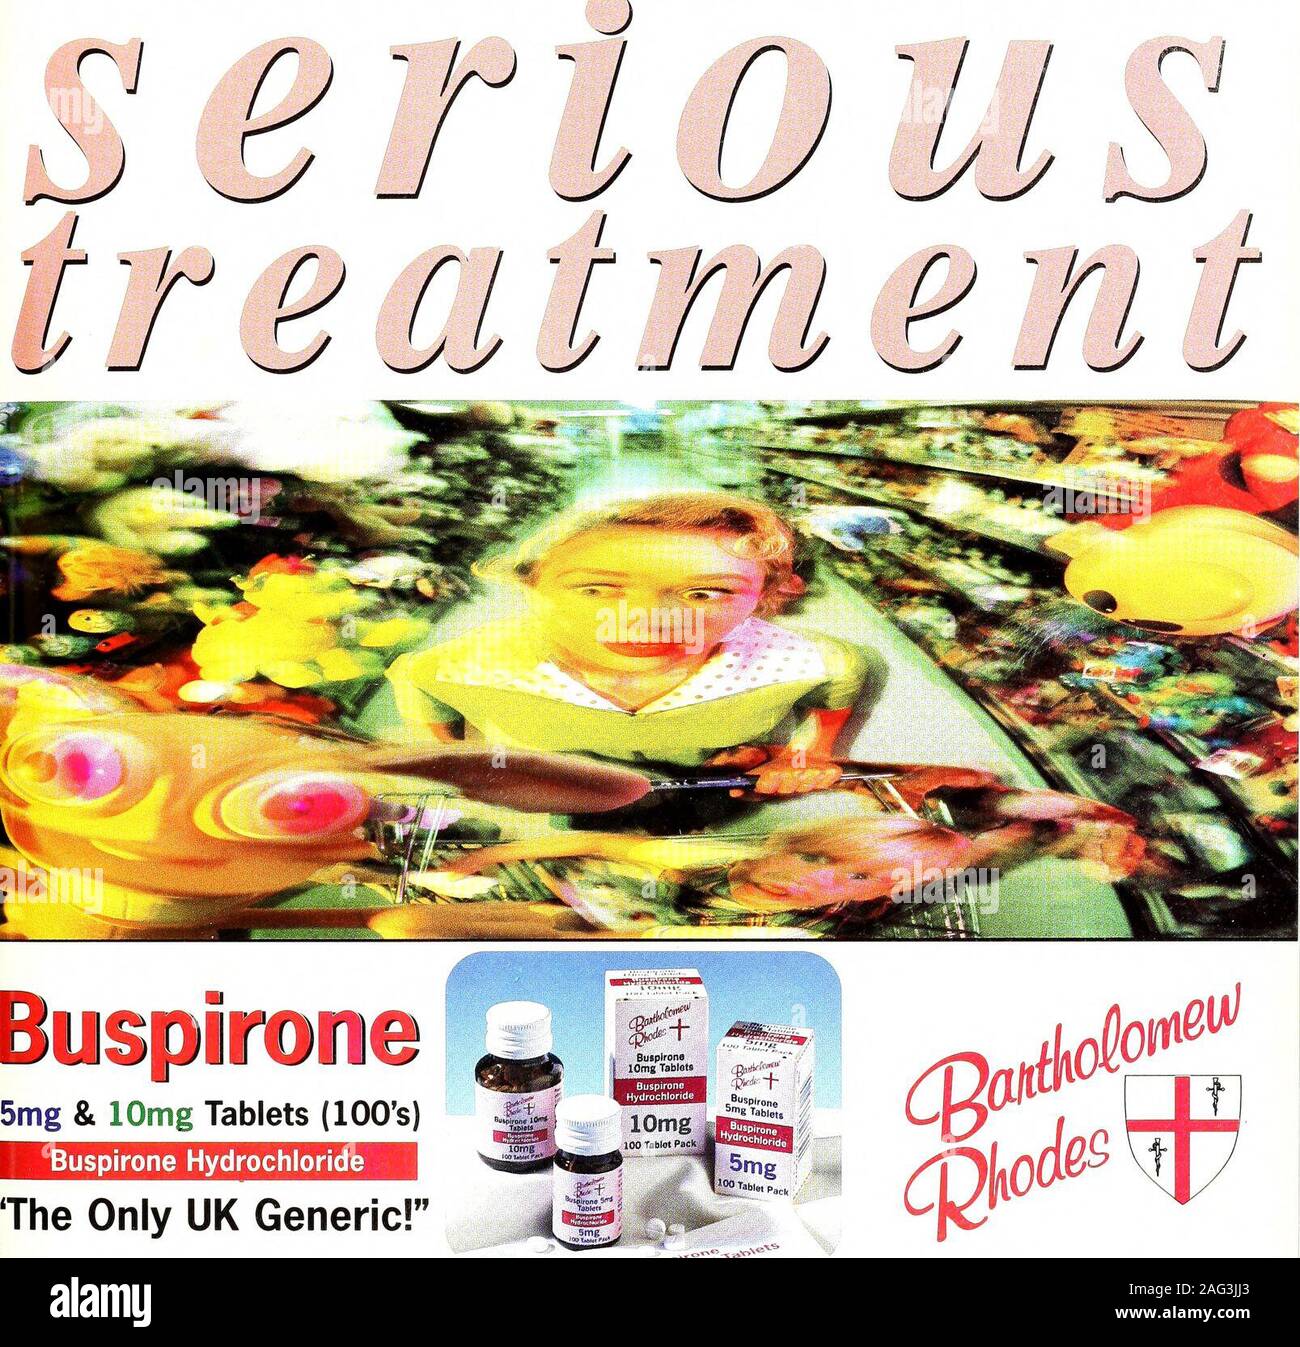 . The chemist and druggist [electronic resource]. pi ron e 5mg & lOmg Tablets (100s) Buspirone Hydrochloride The Only UK Generic! PRESCRIBING INFORMATION resentation: Buspirone 5mg tablets. Buspirone 10mg tablets. Use: Short term treatment of anxiety disorders (anxiety and phobic neuroses) and symptomatic relief of anxiety with orithout accompanying depression. Dosage and administration: Adults: The initial dose is 10-15mg daily in 2-3 divided doses. The initial dose may be increased by 5mg at intervals of-4 days. The maximum daily dose should not exceed 45mg. There does not appear to be a nee Stock Photo